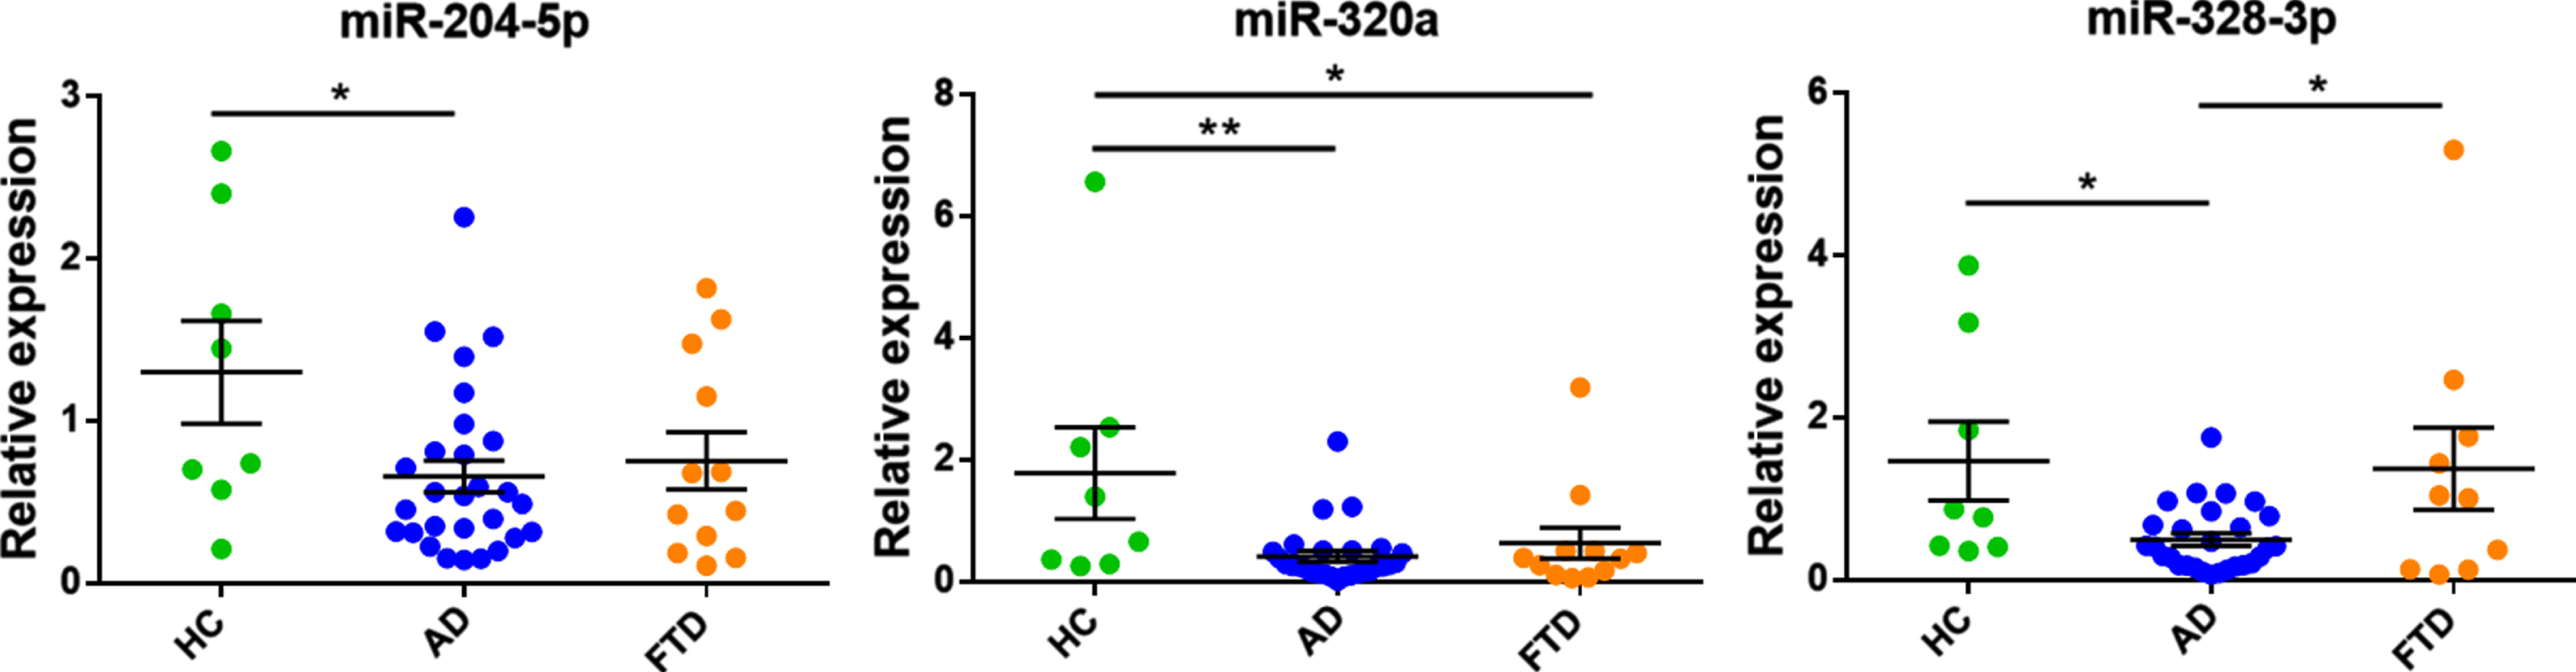 Relative expression of miR-204-5p, miR-320a, and miR-328-3p in exosomes from CSF of young-onset AD, FTD, and HCs. Data are presented as the mean±SEM. One-way ANOVA with Bonferroni post hoc test was used to compare the differences between disease groups. *p≤0.05; **p≤0.01.